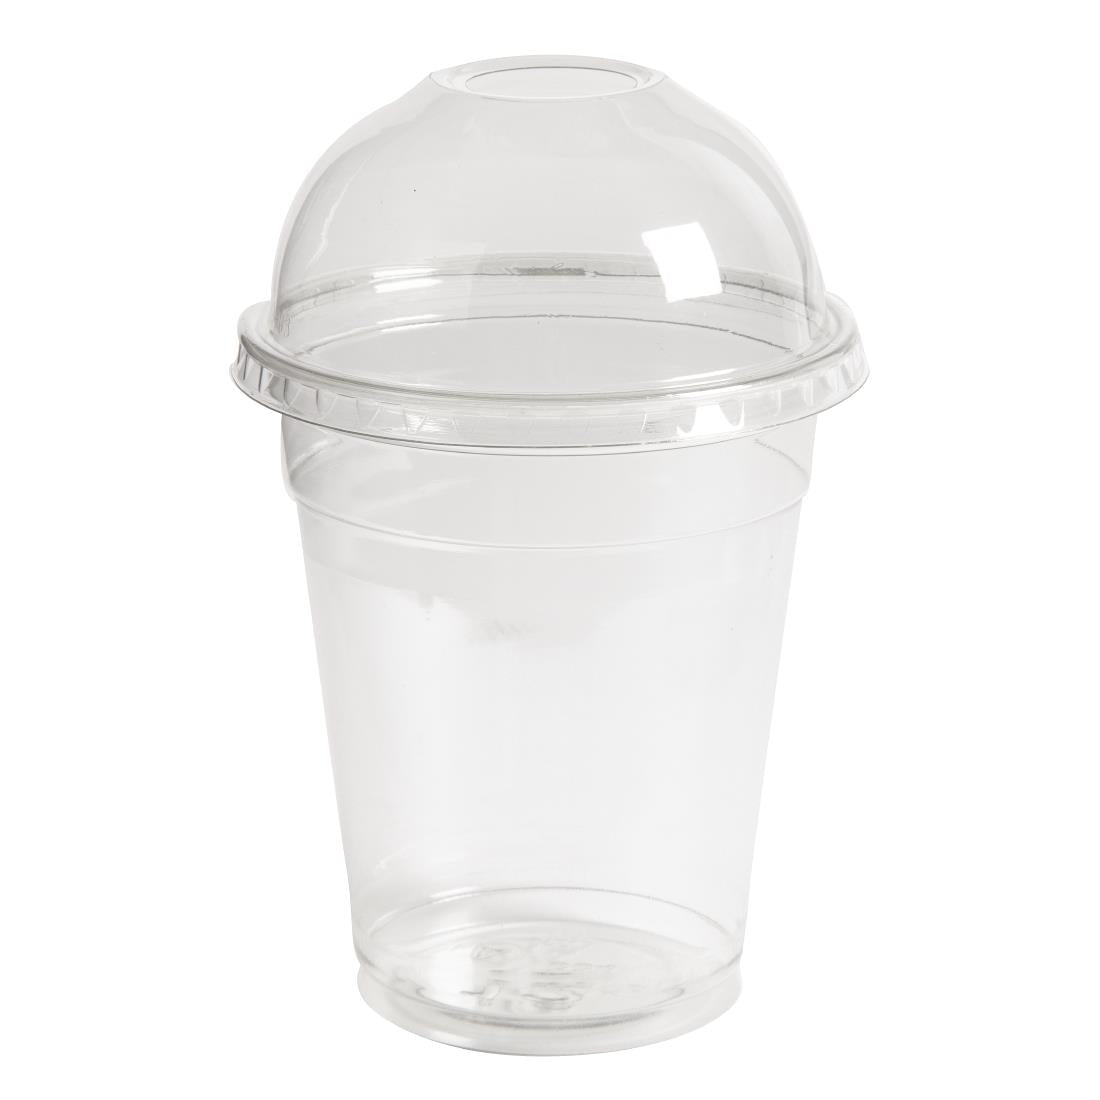 DE134 eGreen Flexy-Glass Recyclable Domed Lids For Half Pint and Hi-Ball Glasses With Hole 77mm (Pack of 1000) JD Catering Equipment Solutions Ltd